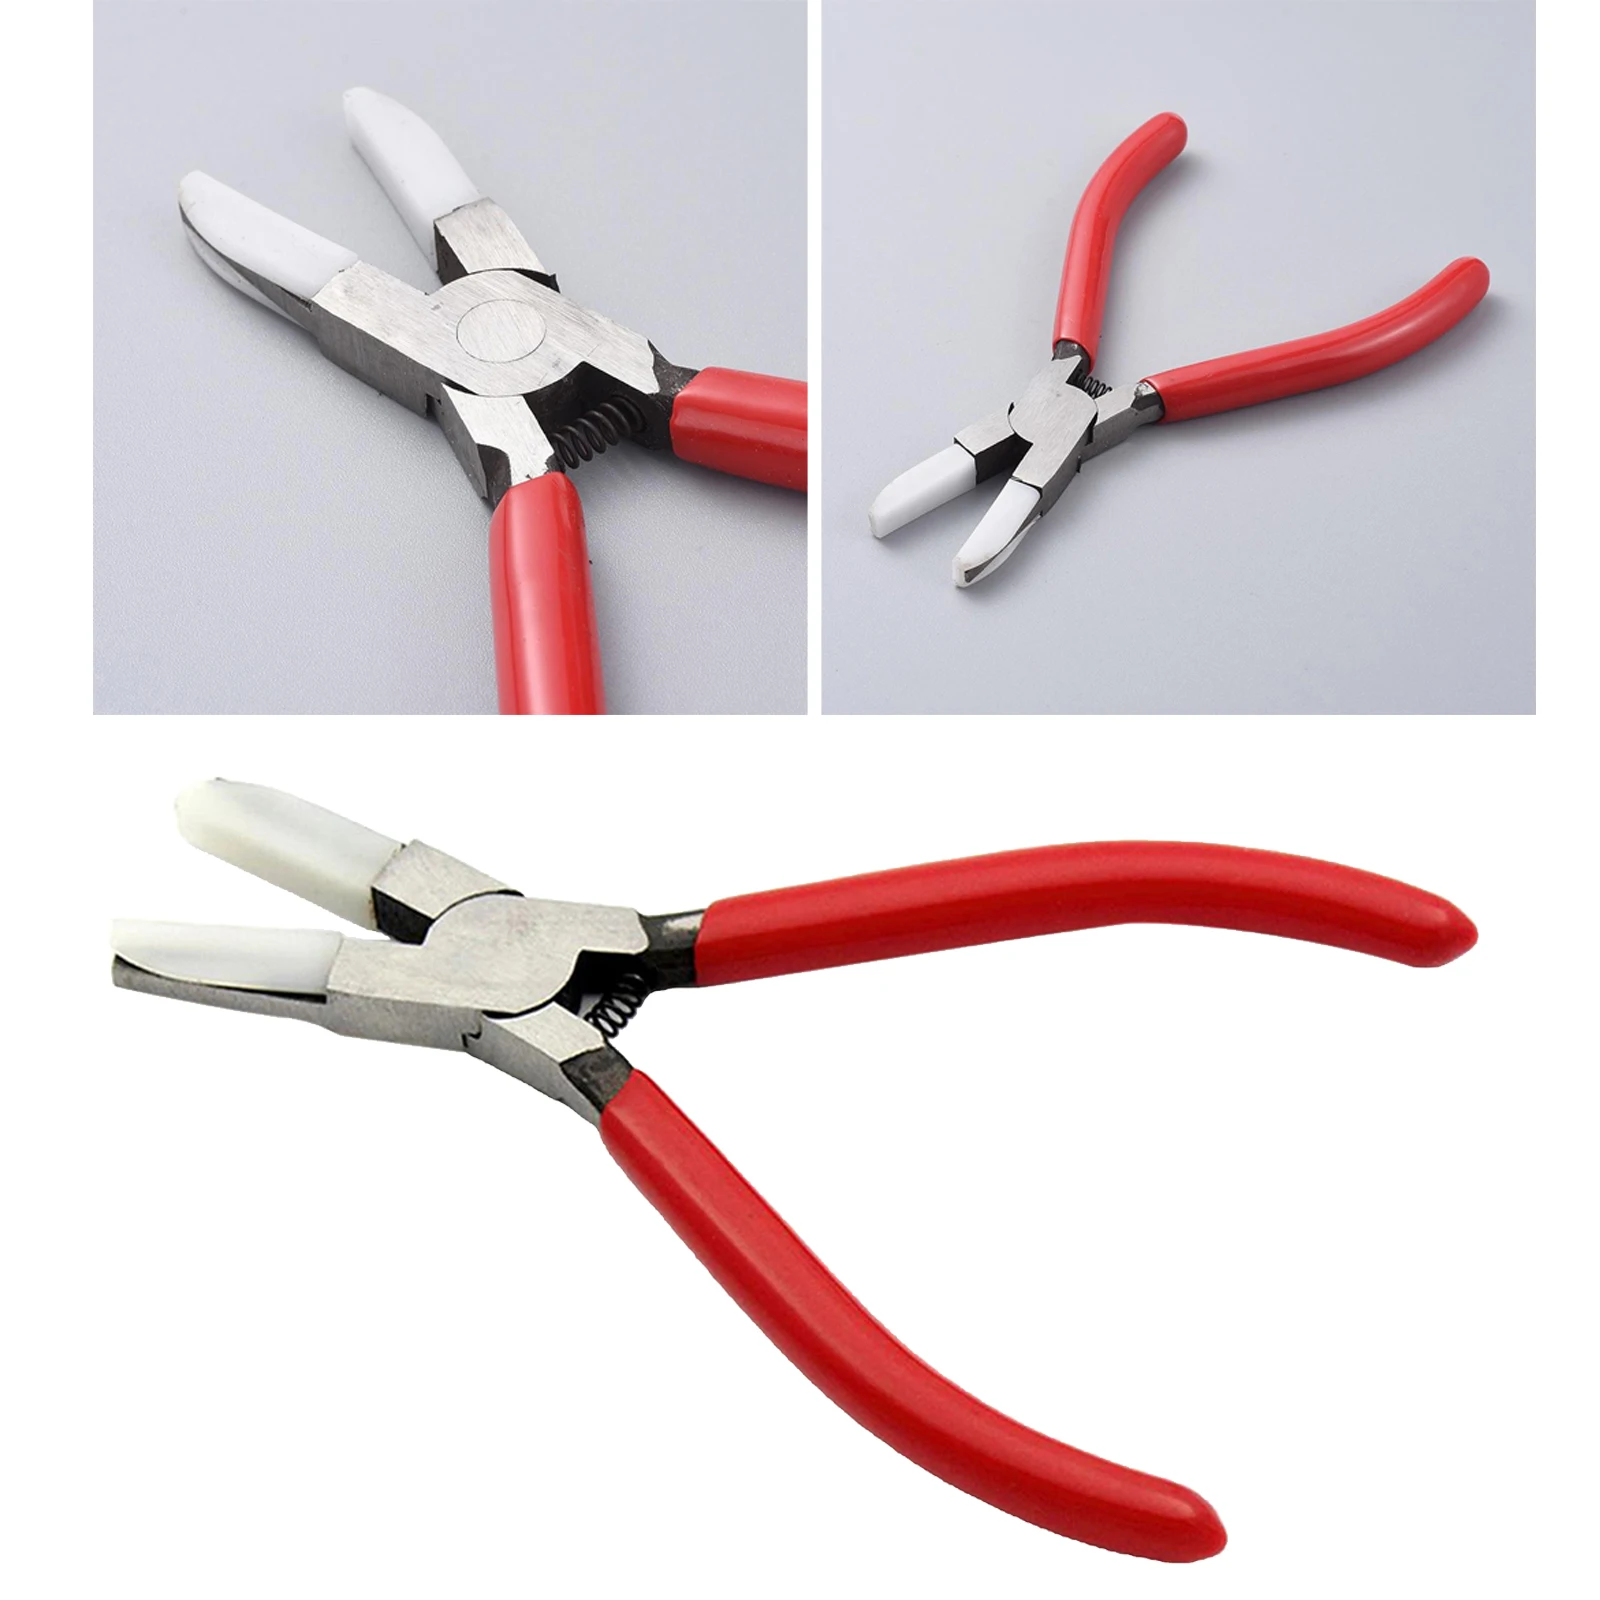 1PC Jaw Pliers Hand Pliers Toothless Flat Nose Pliers Flat Mouth Flat Nose Pliers Diagonal Cutting Plier